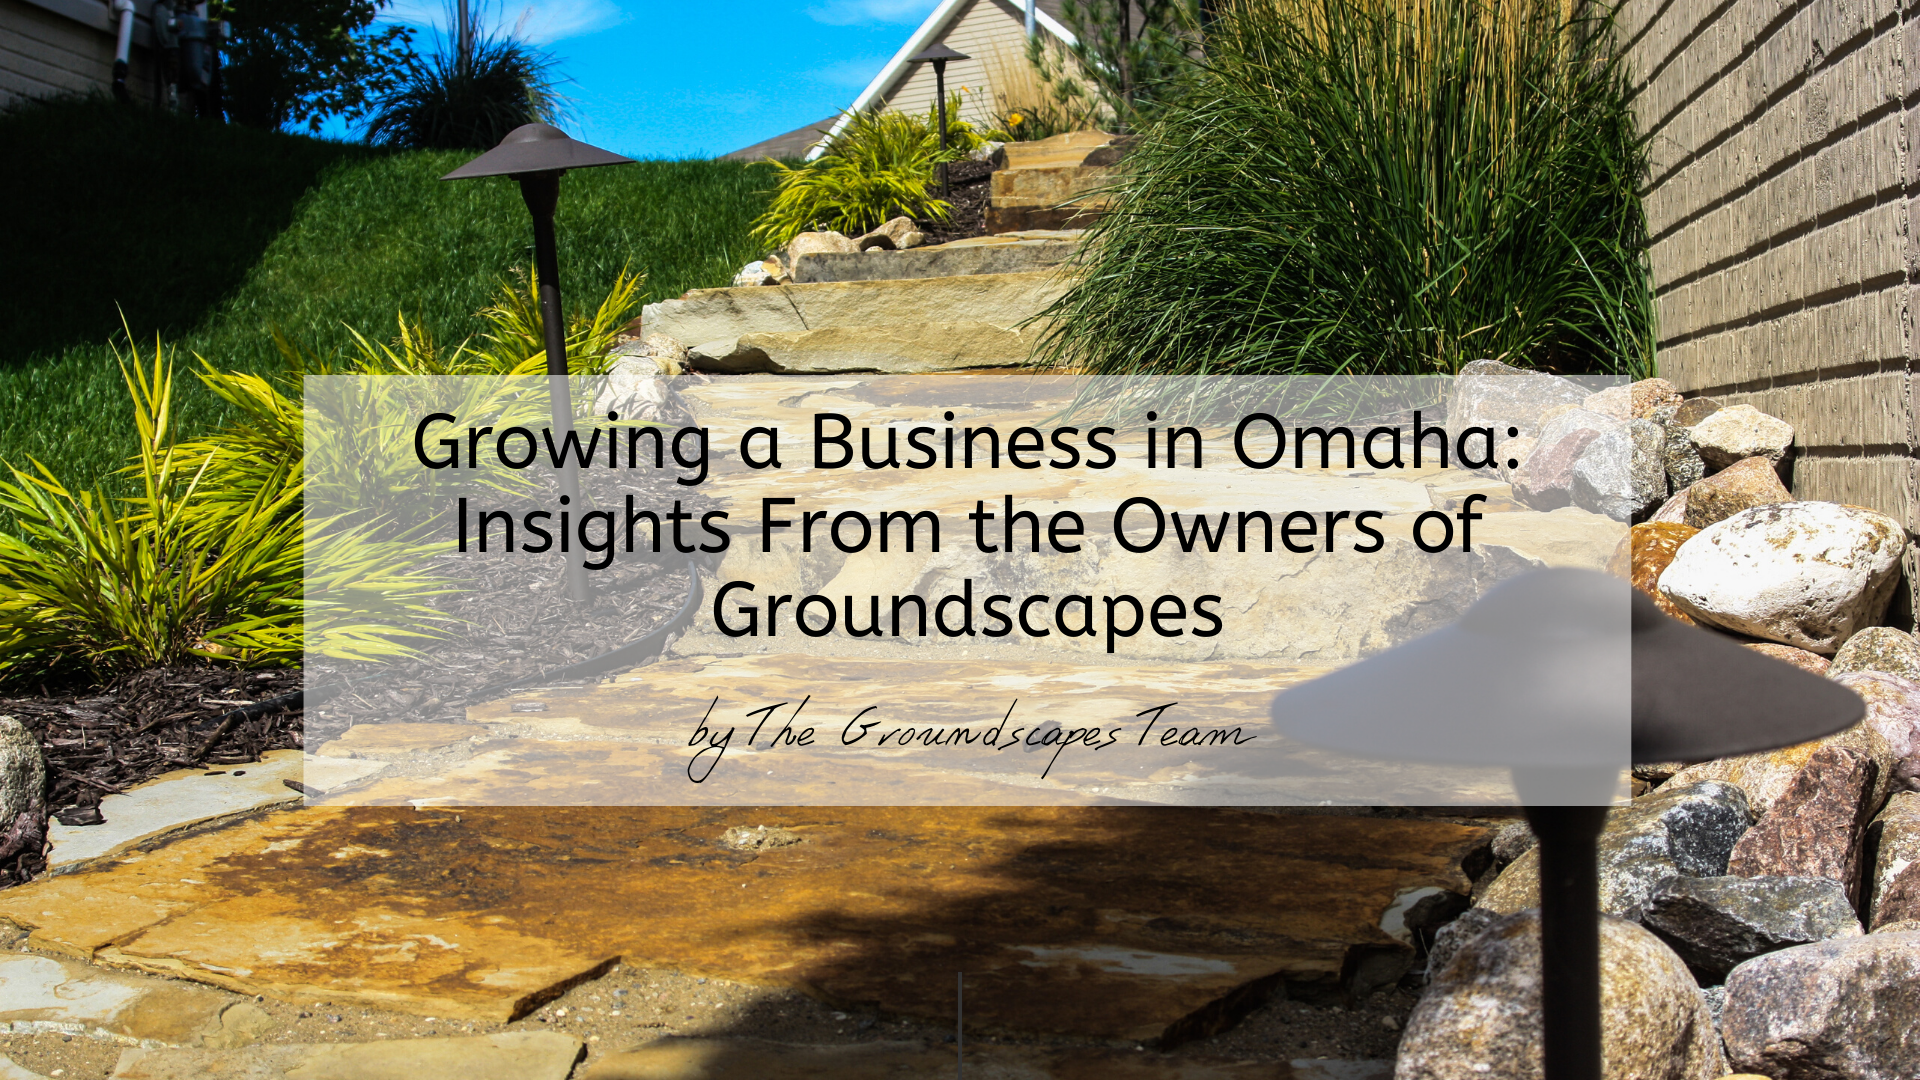 Growing a Business in Omaha: Insights from the Owners of Groundscapes